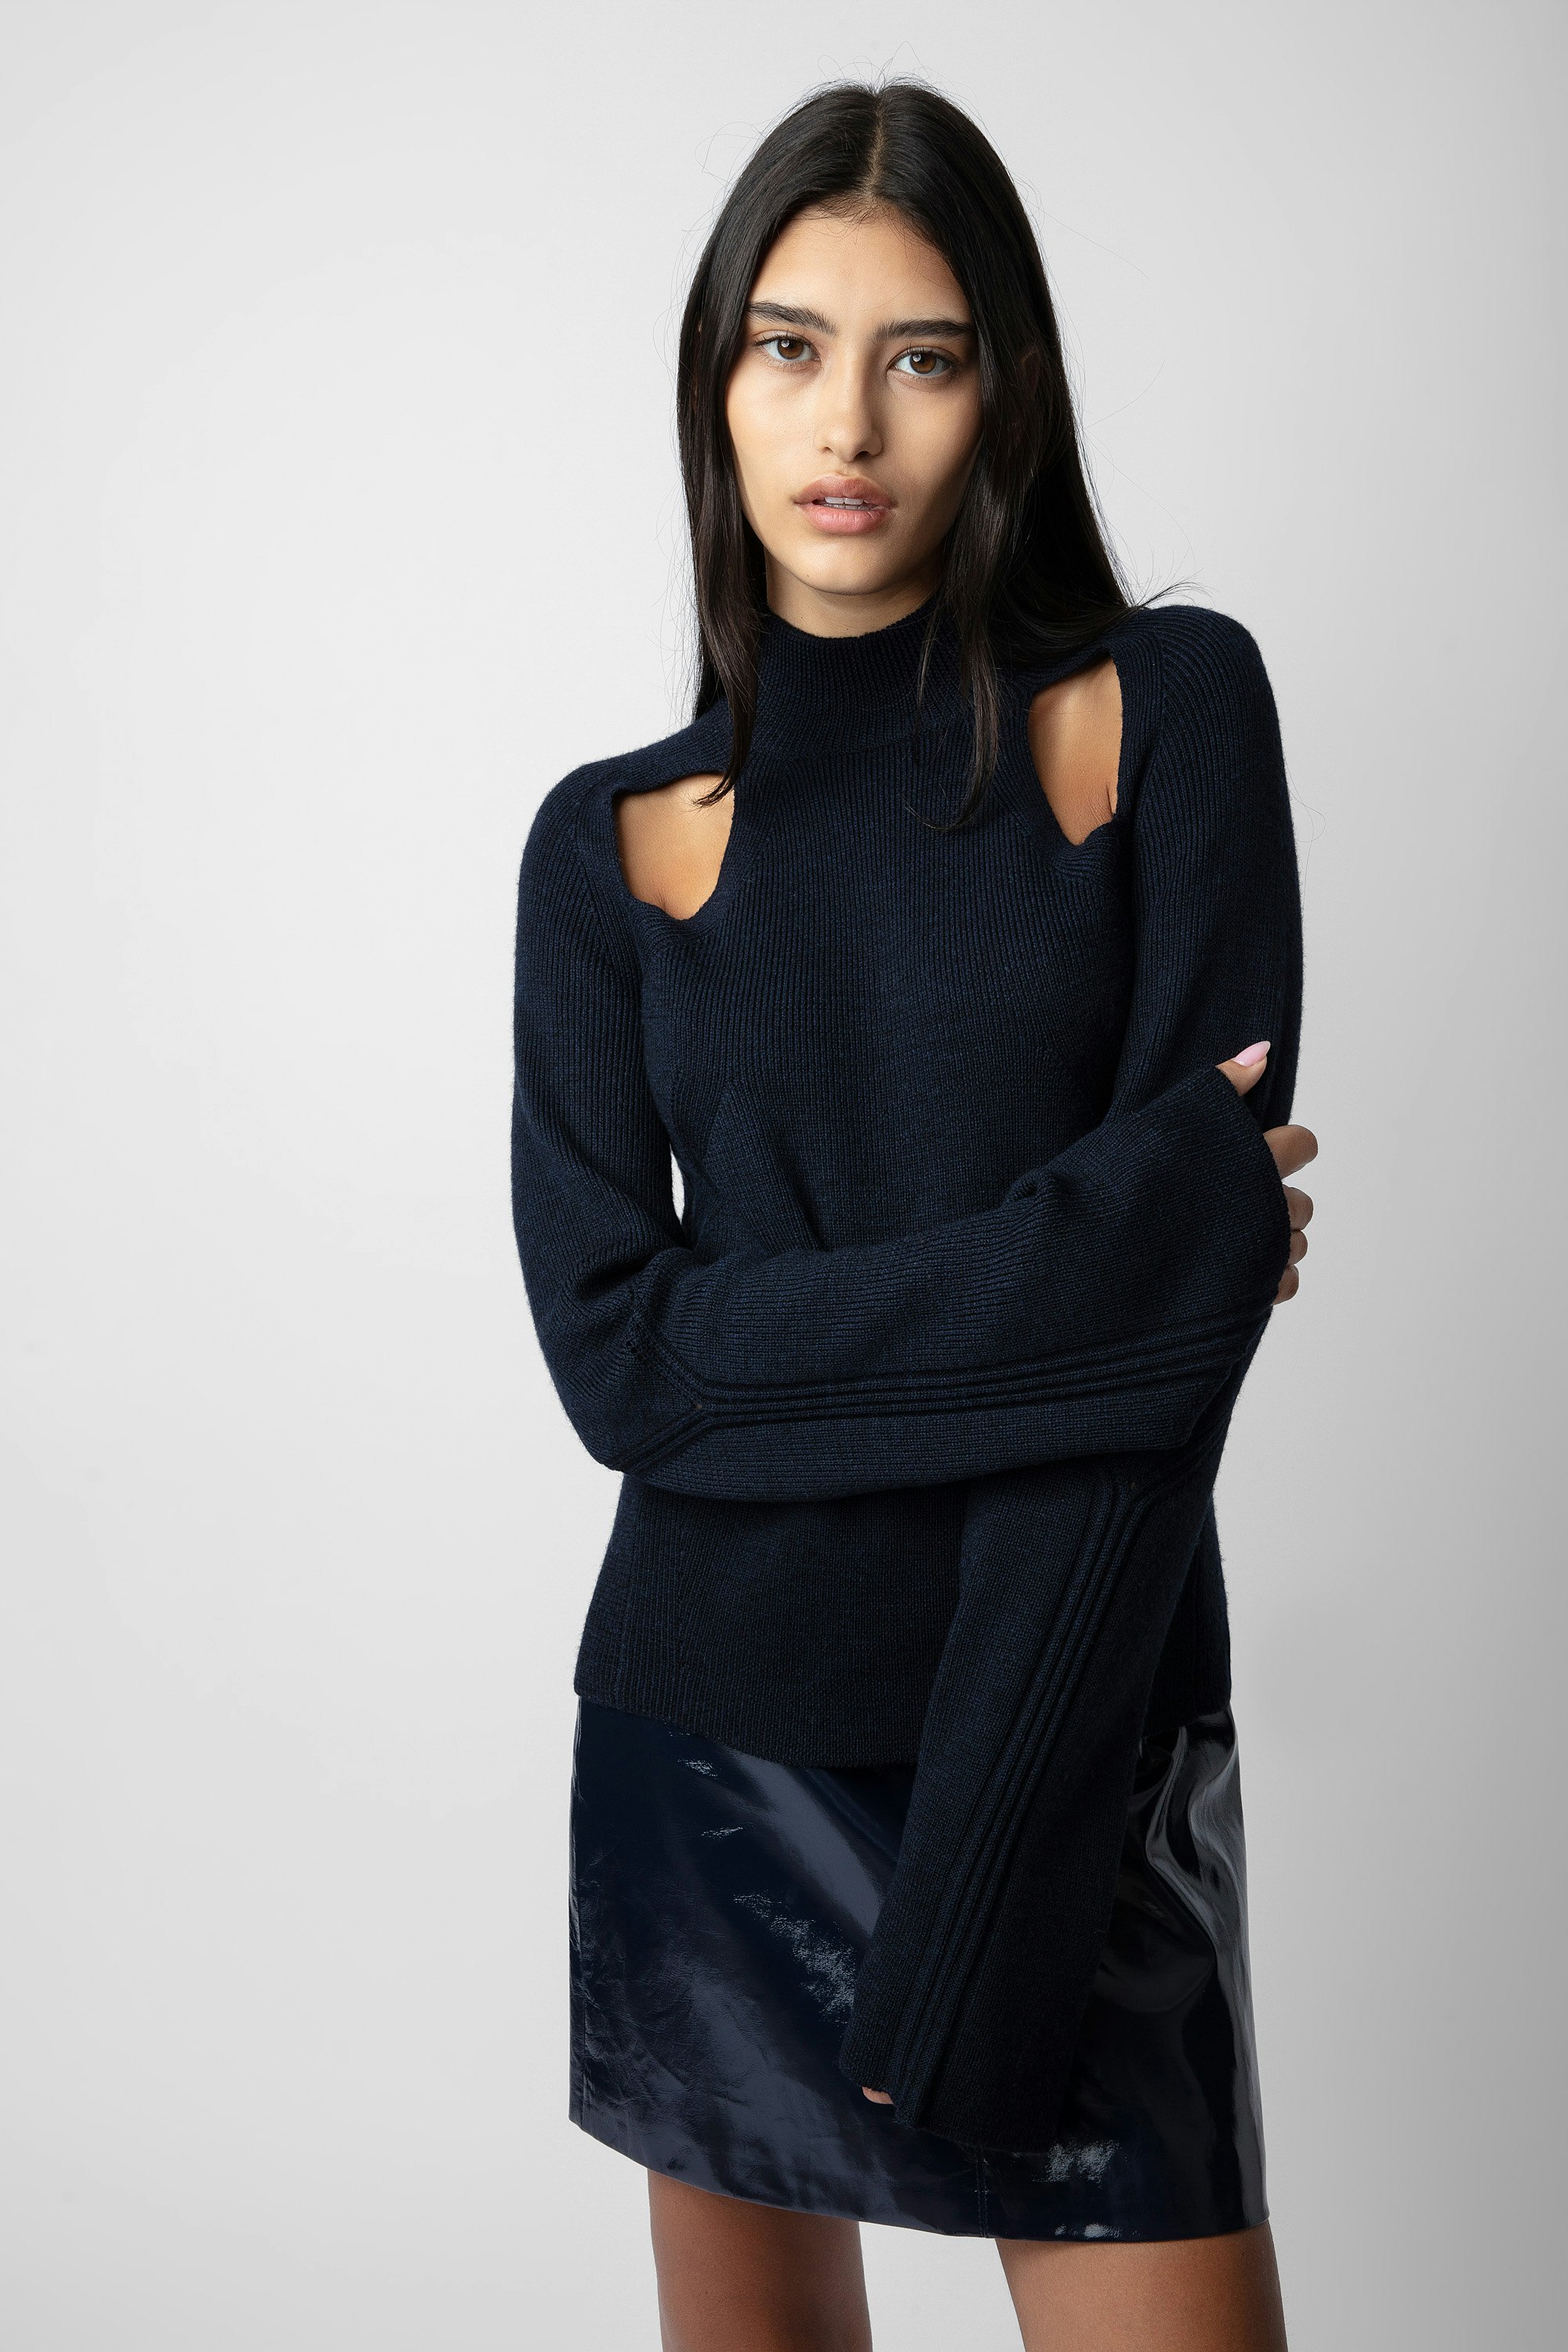 Micky Sweater - Women’s navy blue merino wool sweater with cut-outs on the shoulders and overstitching.